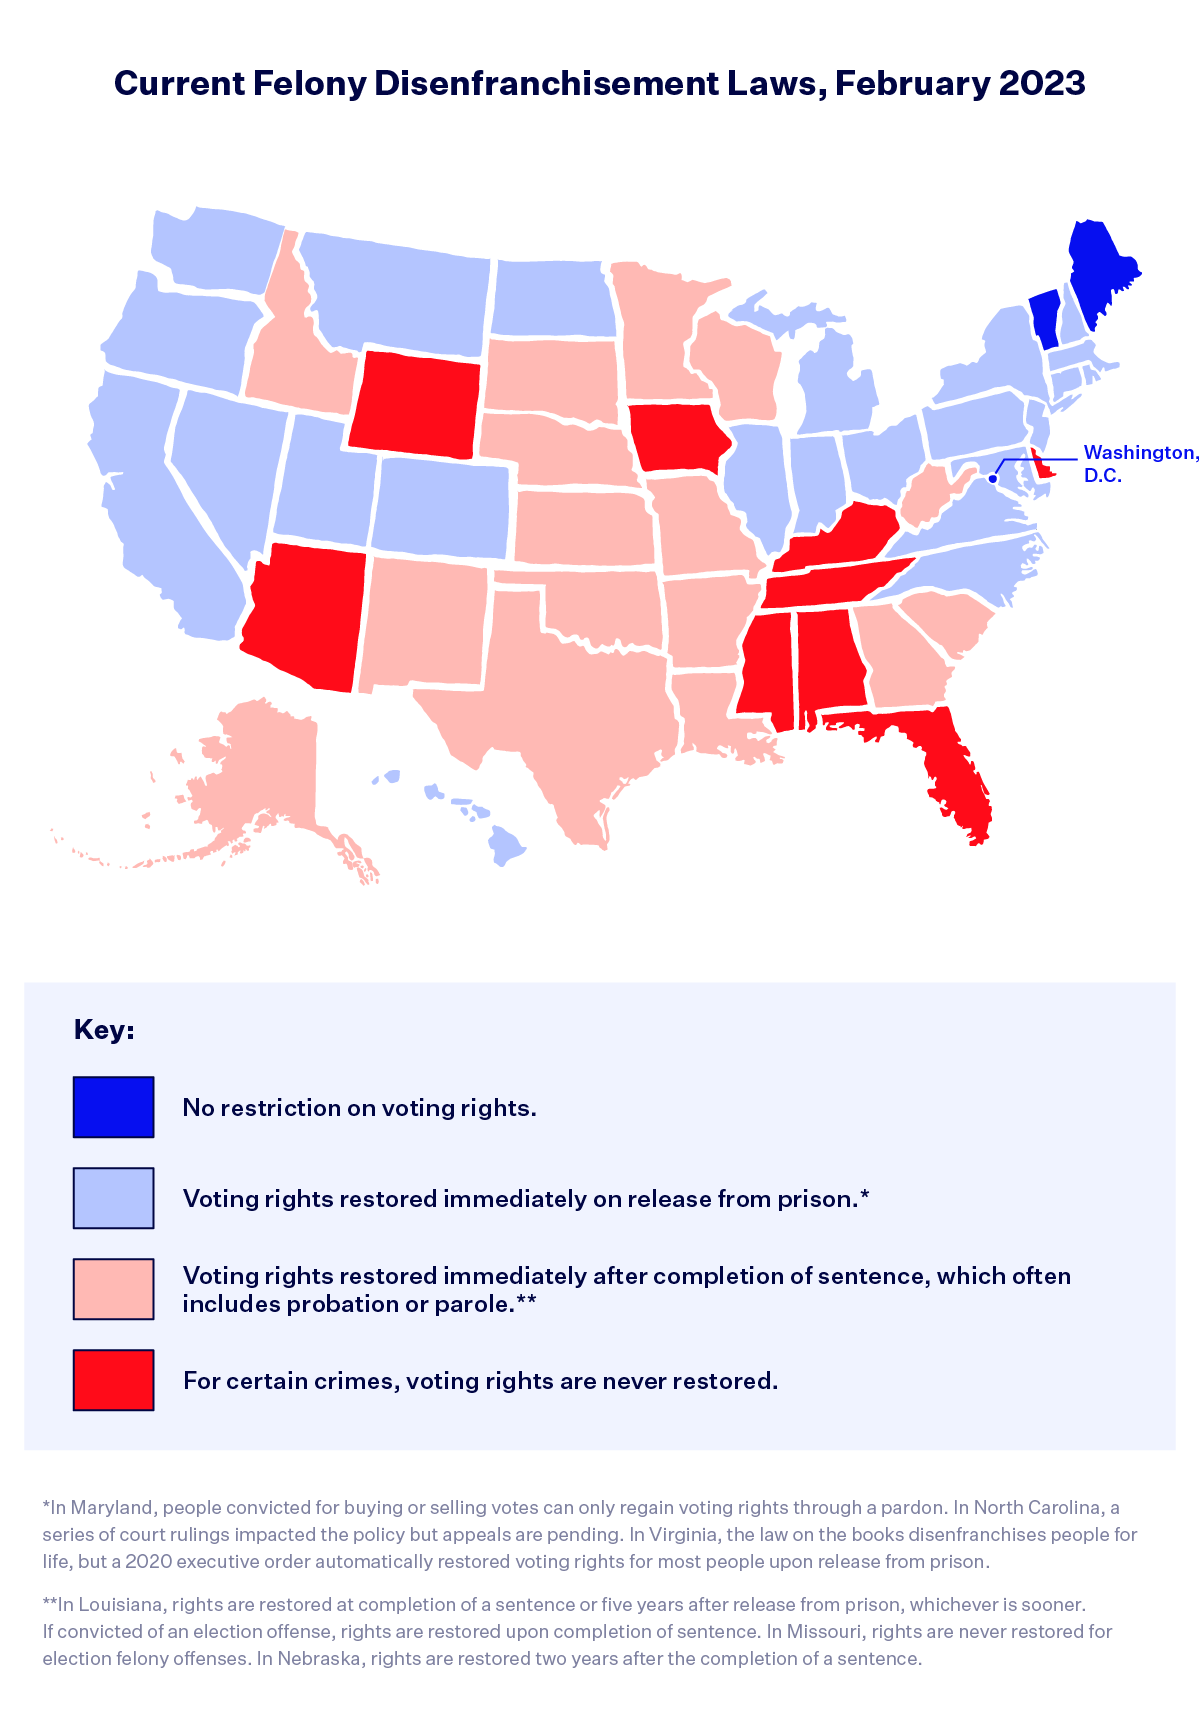 "A map of the United States titled "Current Felony Disenfranchisement Laws, February 2023." The key includes dark blue "No restriction on voting rights." (ME, VT, DC); light blue "Voting rights restored immediately on release from prison.*" (NH, MA, RI, CT, NY, NJ, PA, MD, VA, NC, OH, MI, IN, IL, ND, MT, CO, UT, NV, CA, WA, OR, HI); light pink "Voting rights restored immediately after completion of sentence, which often includes probation or parole.**" (WV, SC, GA, WI, MN, MO, AR, LA, SD, NE, KS, OK, TX, NM, ID, AK); red "For certain crimes, voting rights are never restored." (DE, FL, KY, TN, AL, MS, IA, WY, AZ).  Footnotes read: *In Maryland, people convicted for buying or selling votes can only regain voting rights through a pardon. In North Carolina, a series of court rulings impacted the policy but appeals are pending. In Virginia, the law on the books disenfranchises people for life, but a 2020 executive order automatically restored voting rights for most people upon release from prison. **In Louisiana, rights are restored at completion of a sentence or five years after release from prison, whichever is sooner. If convicted of an election offense, rights are restored upon completion of sentence. In Missouri, rights are never restored for election felony offenses. In Nebraska, rights are restored two years after the completion of a sentence."